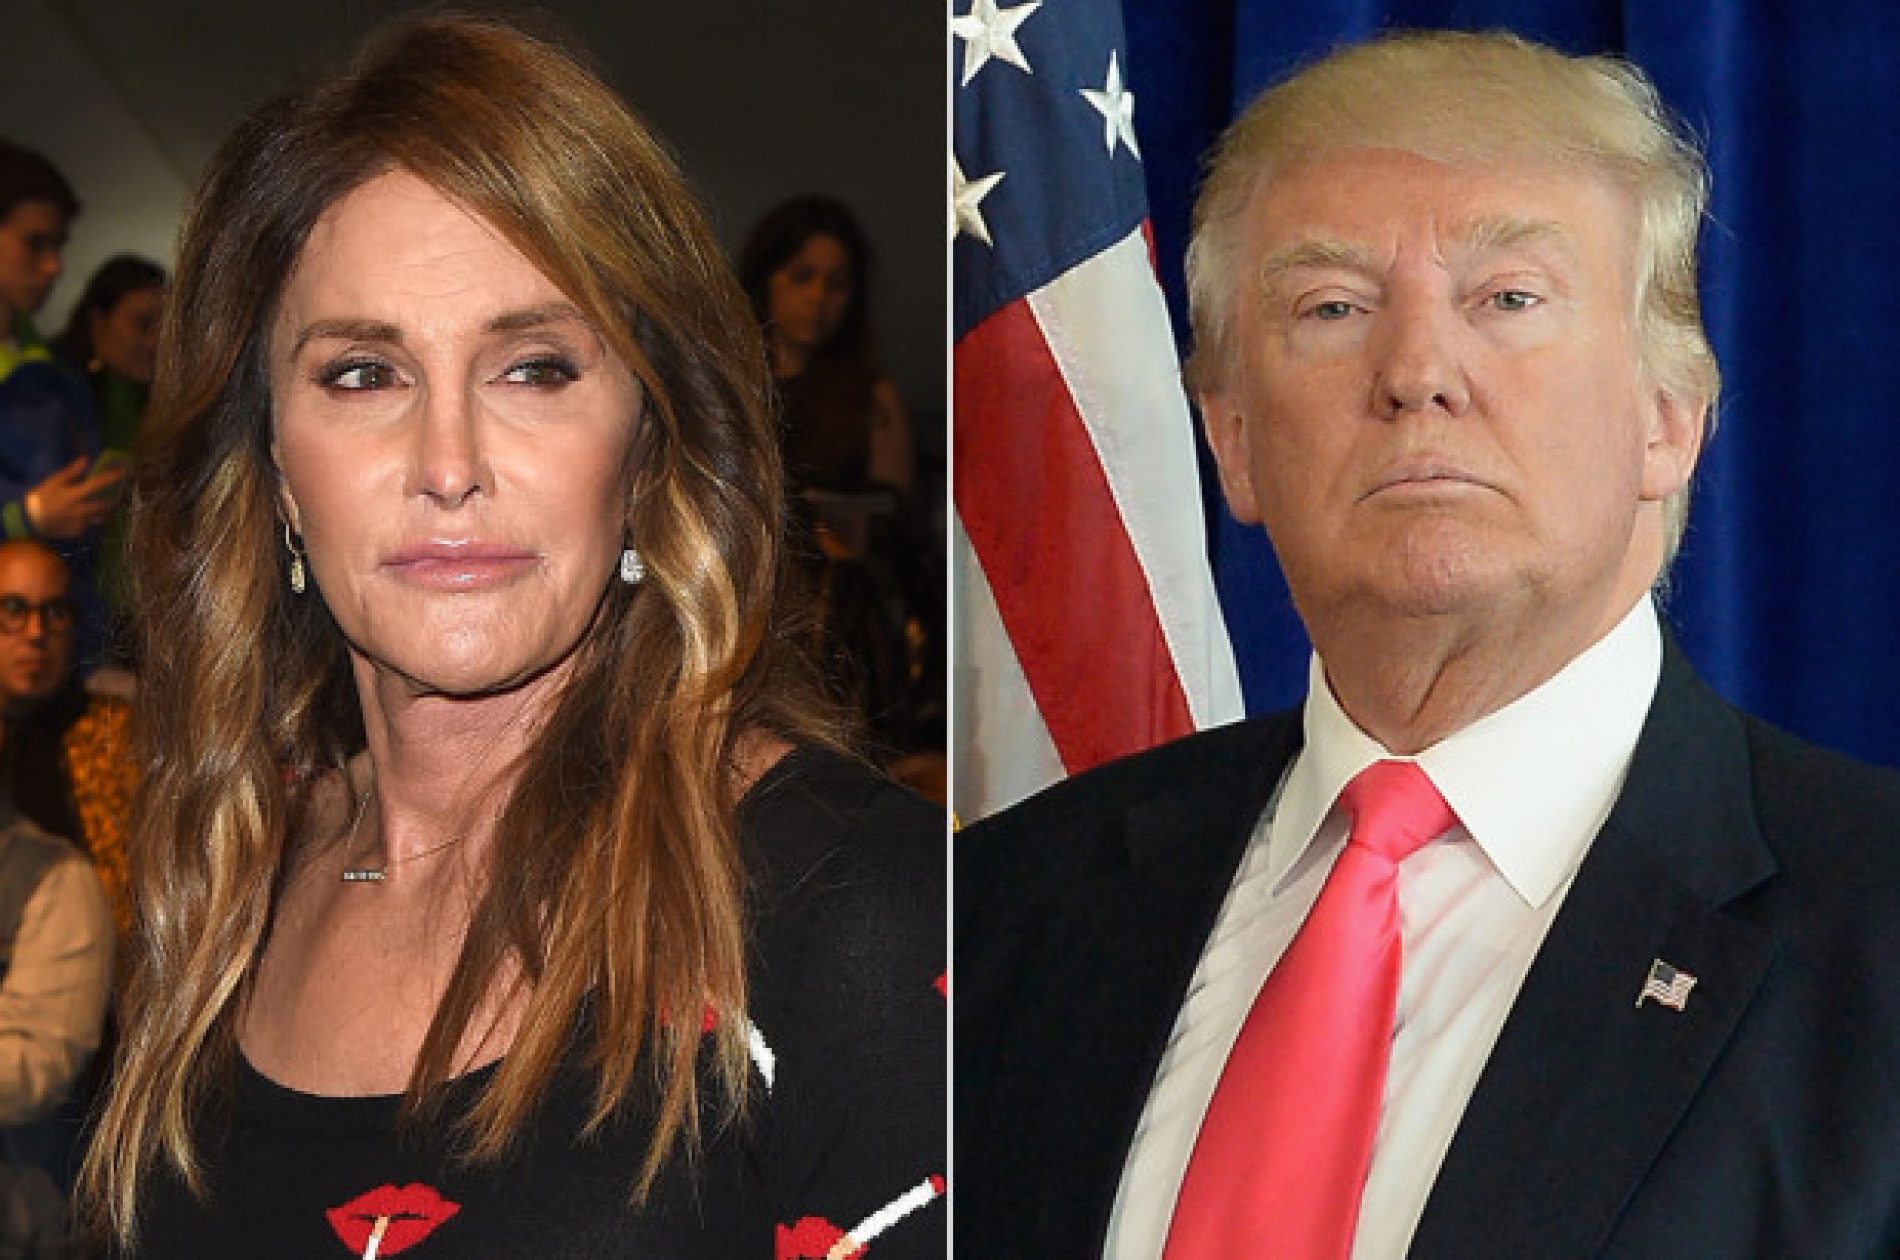 Caitlyn Jenner admits she was wrong about Donald Trump being good for LGBTQ people